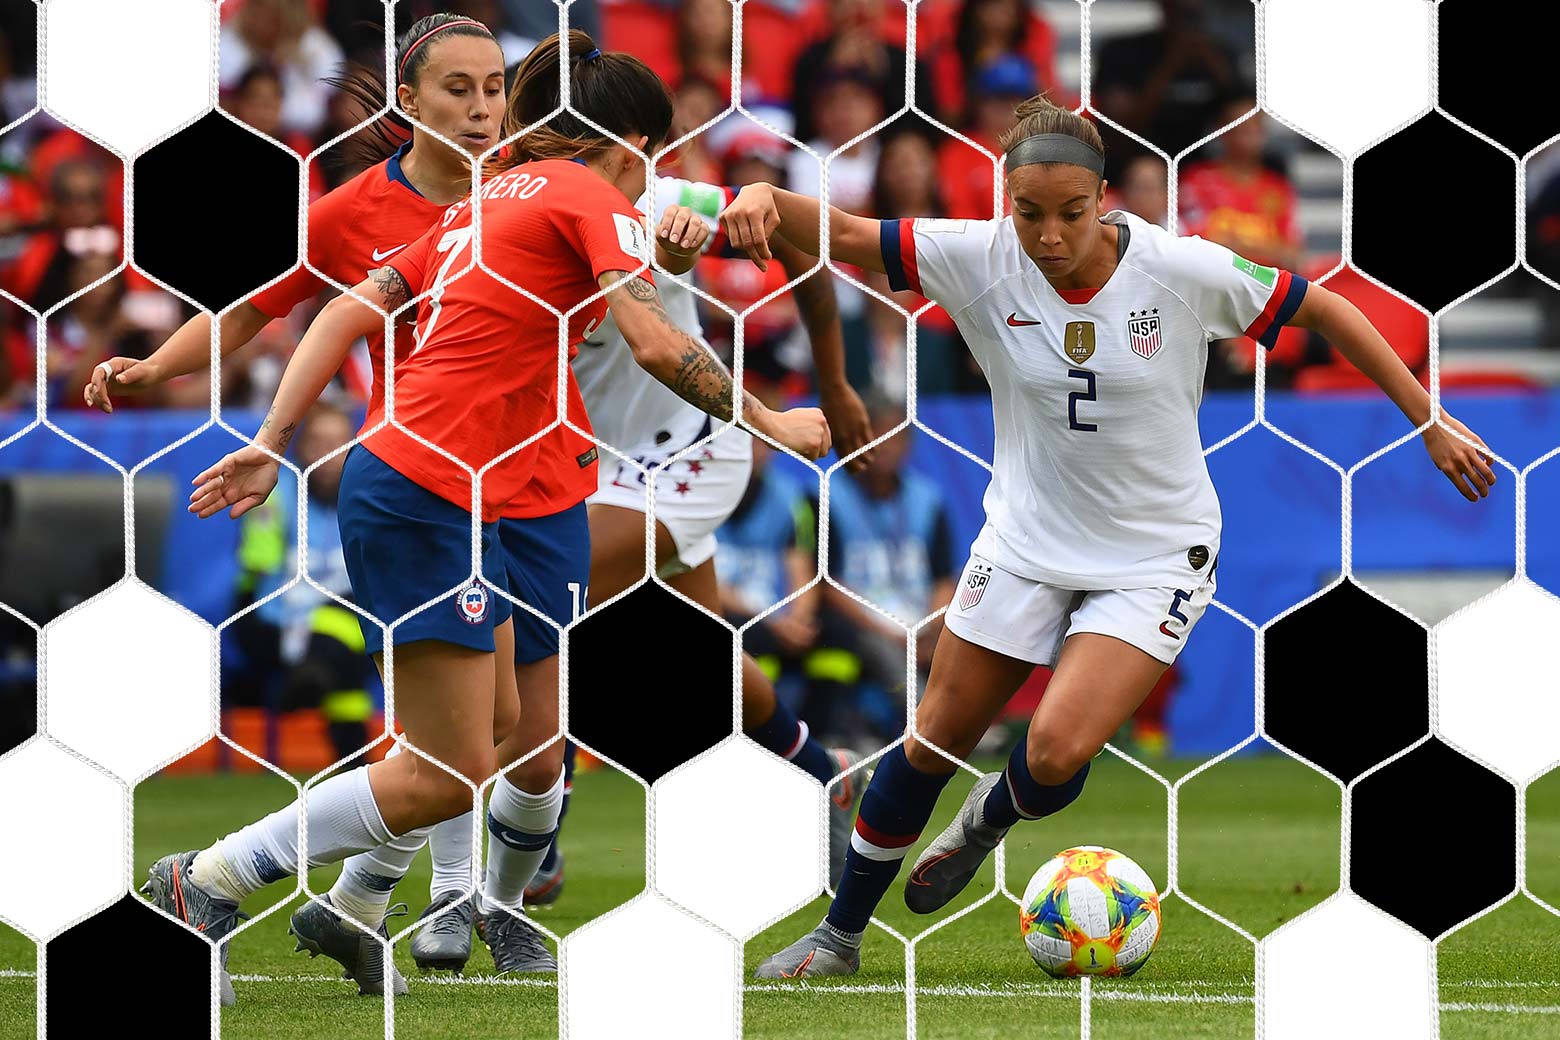 USWNT How different will the U.S. soccer team look at the 2023 Women's